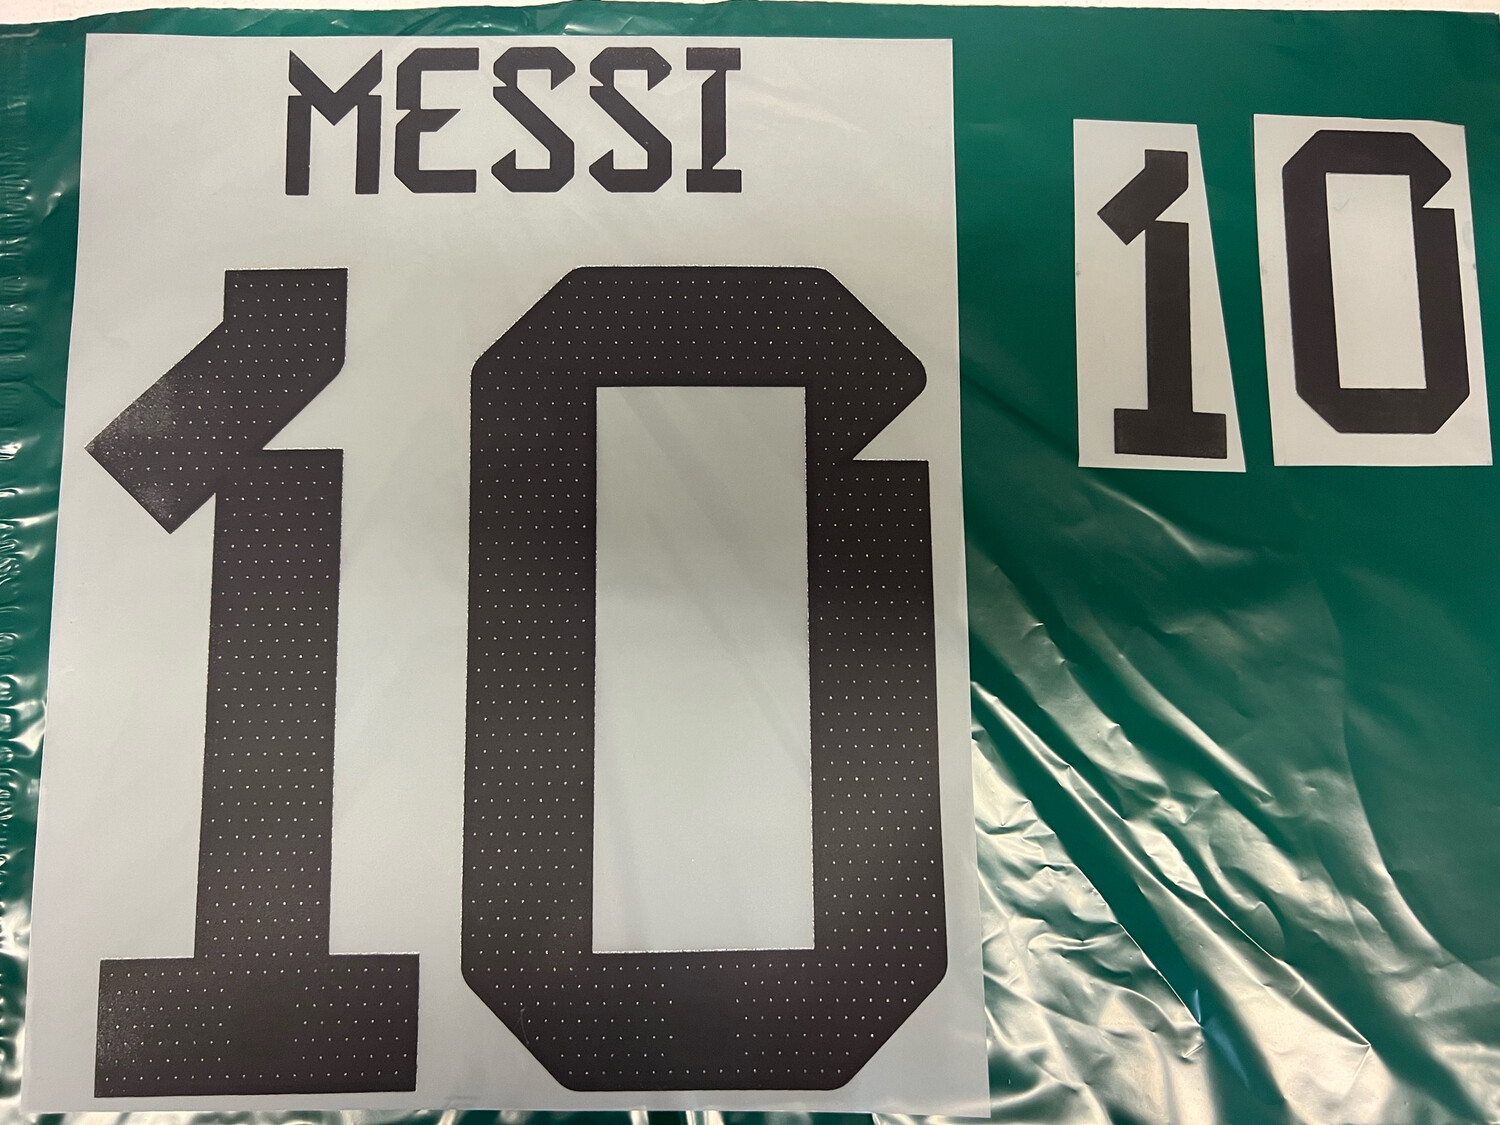 ARGENTINA MESSI MUNDIAL QATAR 2022 WORLD CUP NAME AND NUMBER SET